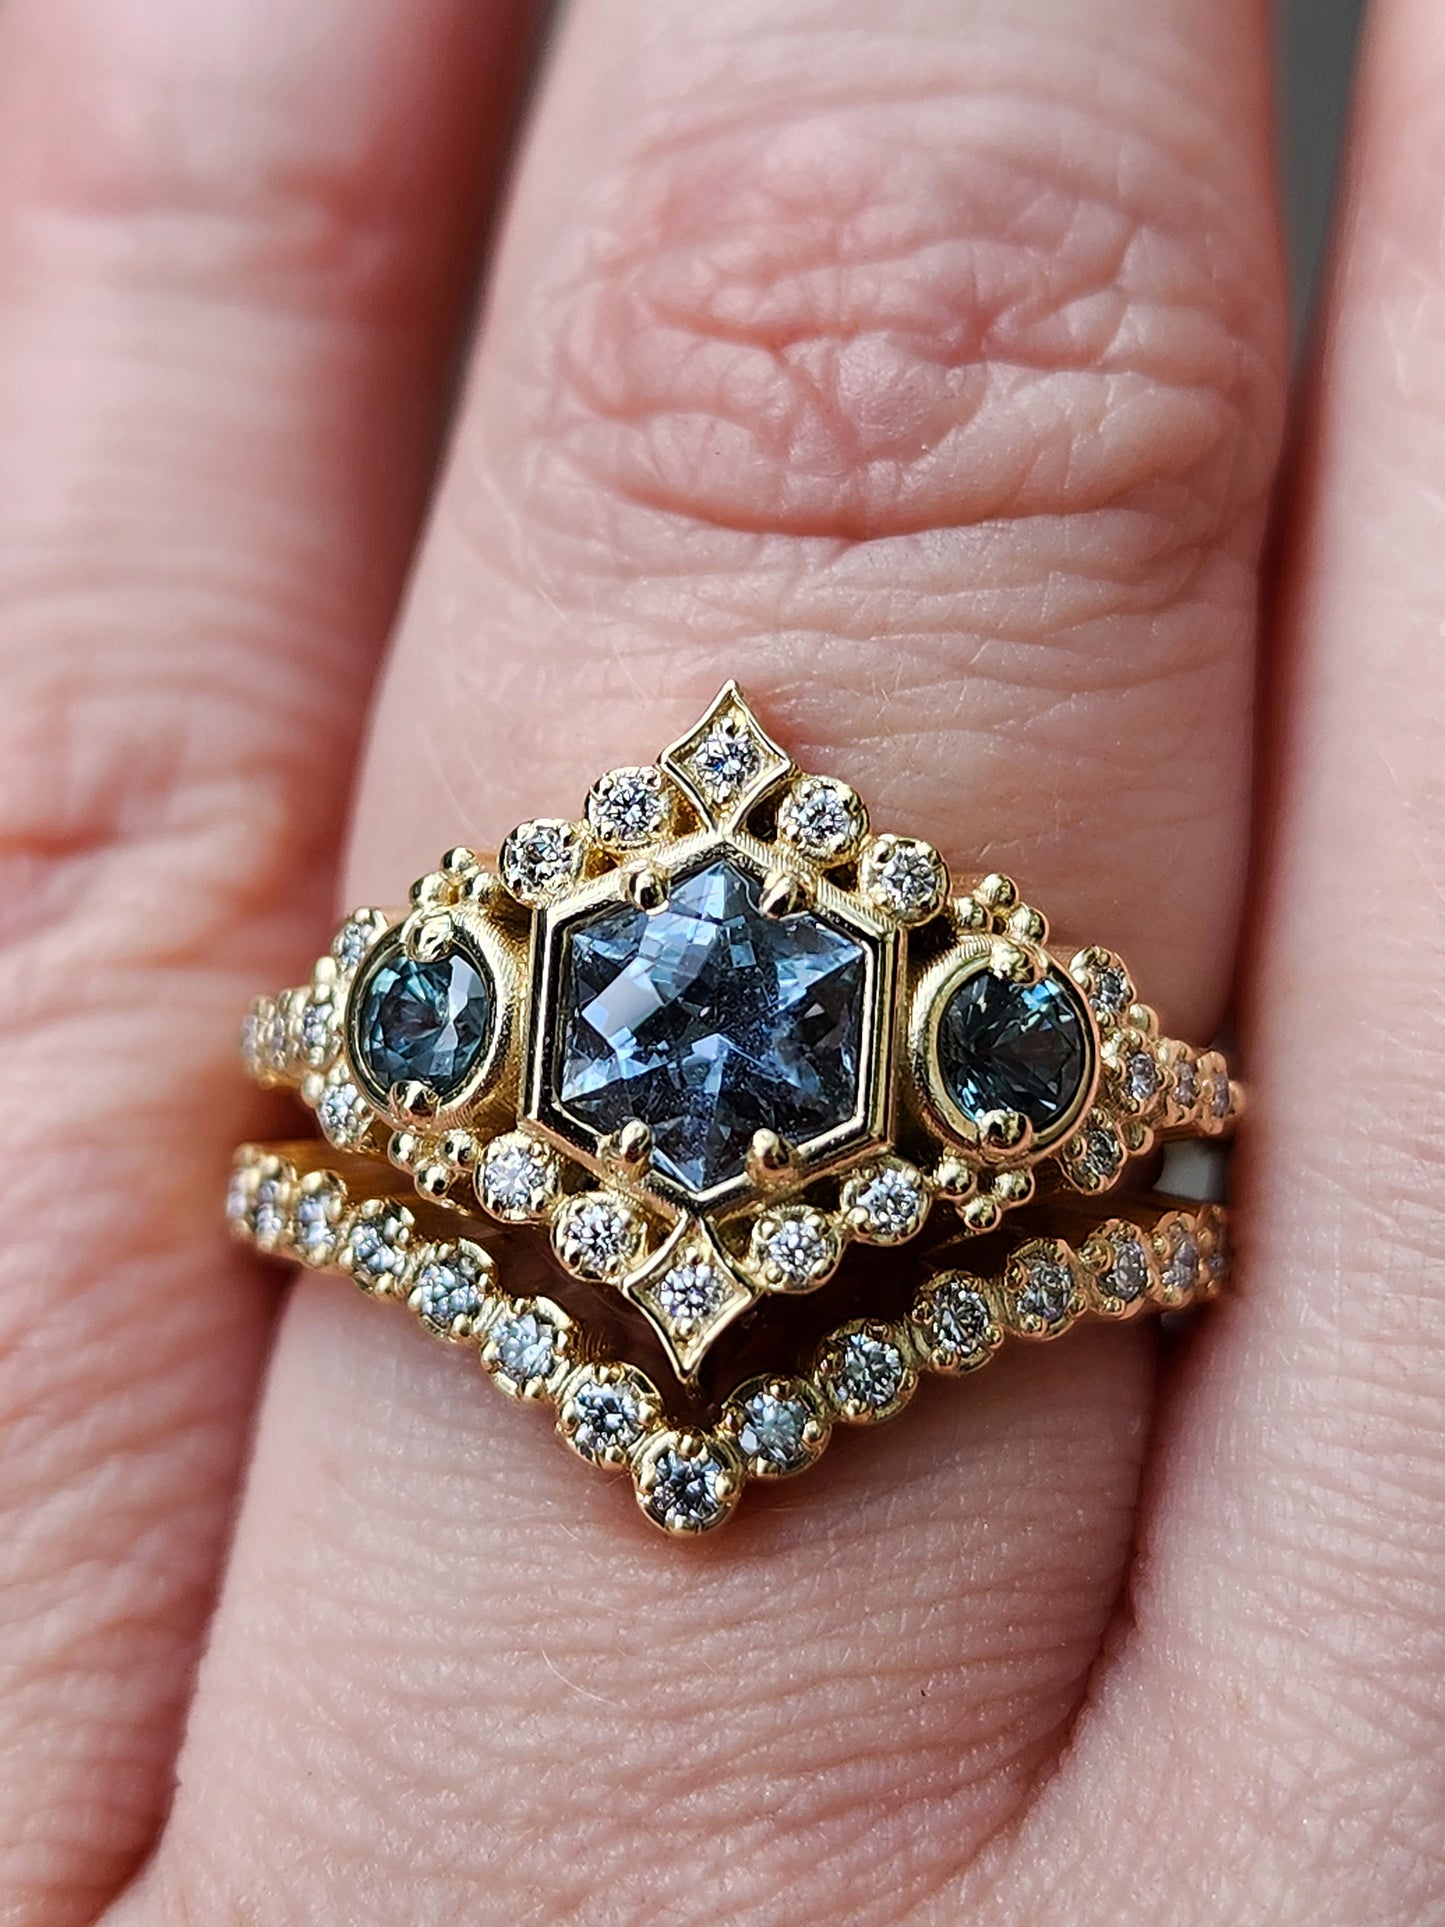 Victorian Wedding Ring set with blue montana sapphires